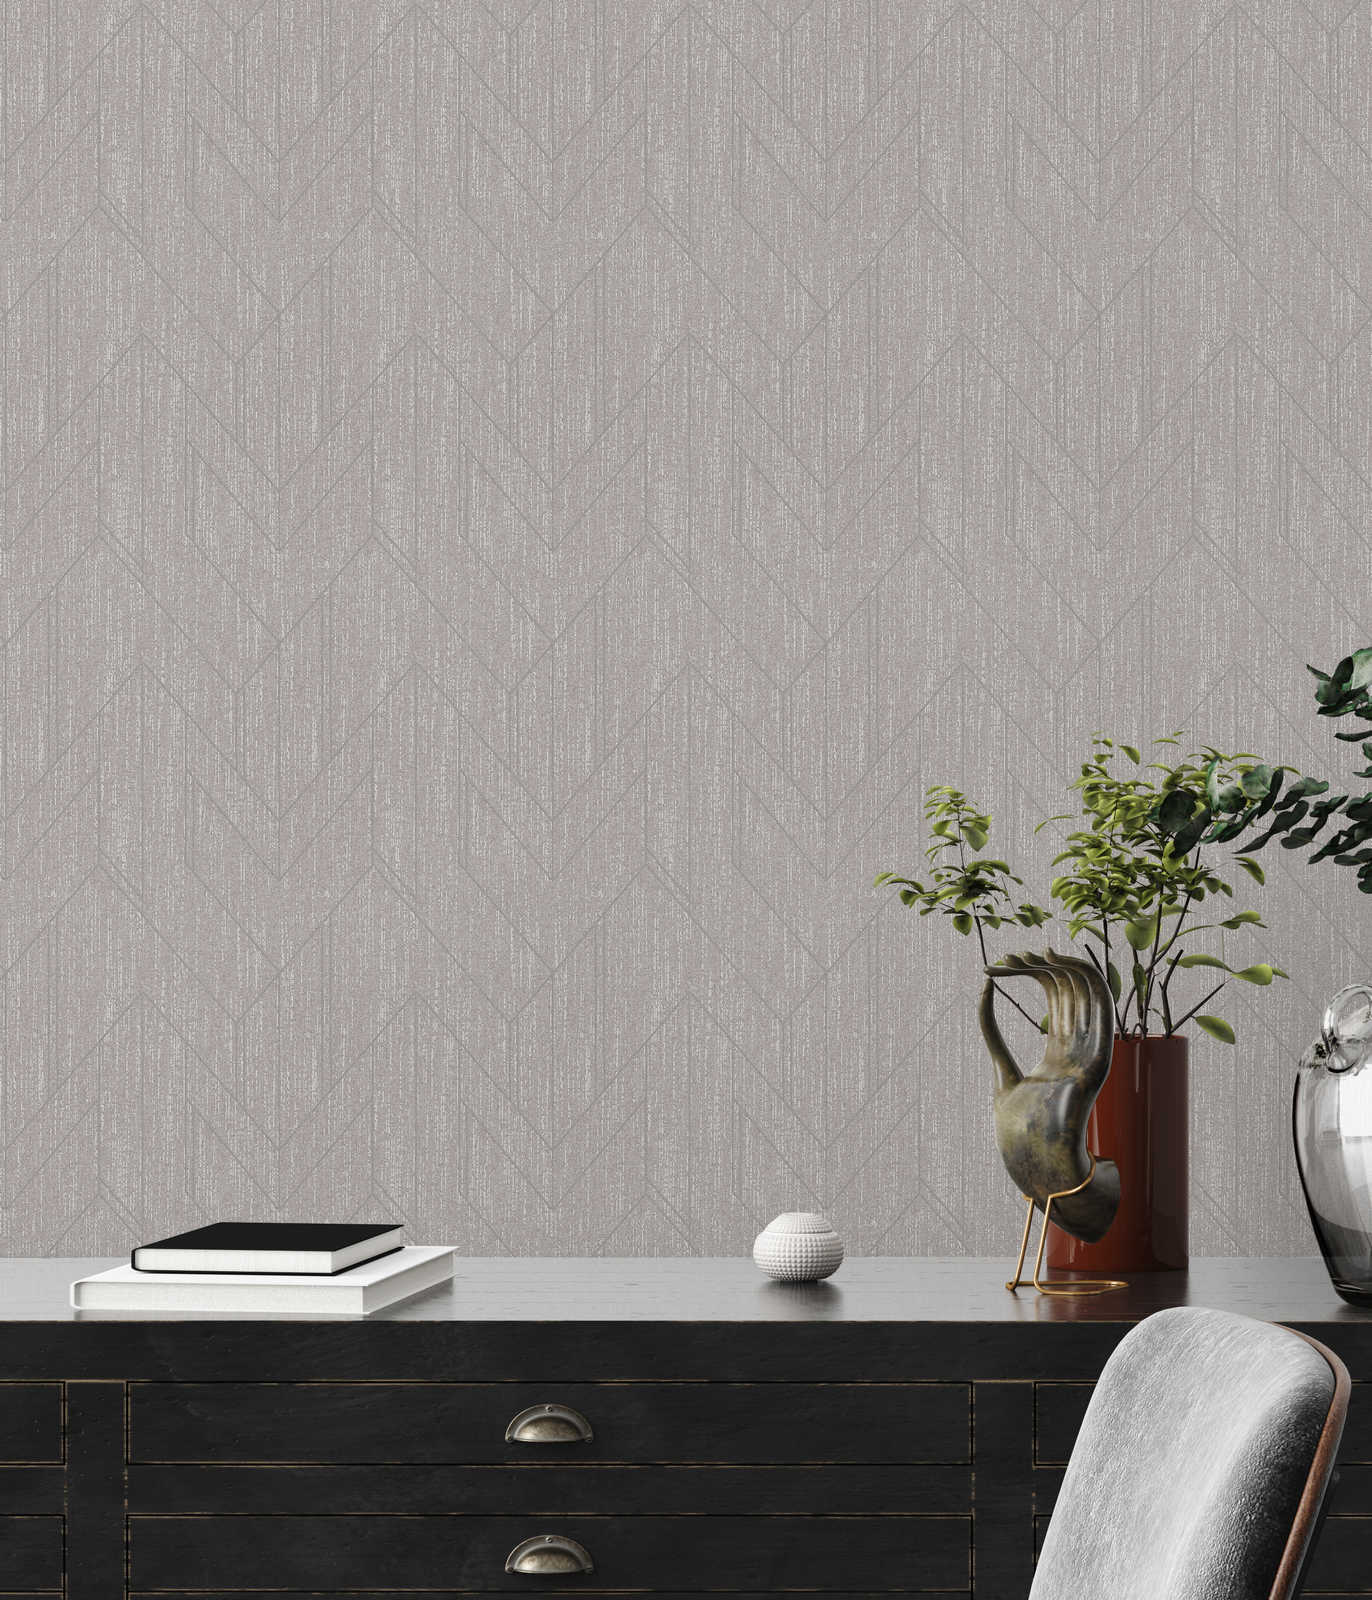             Textile optics wallpaper with structure design & silver pattern - grey
        